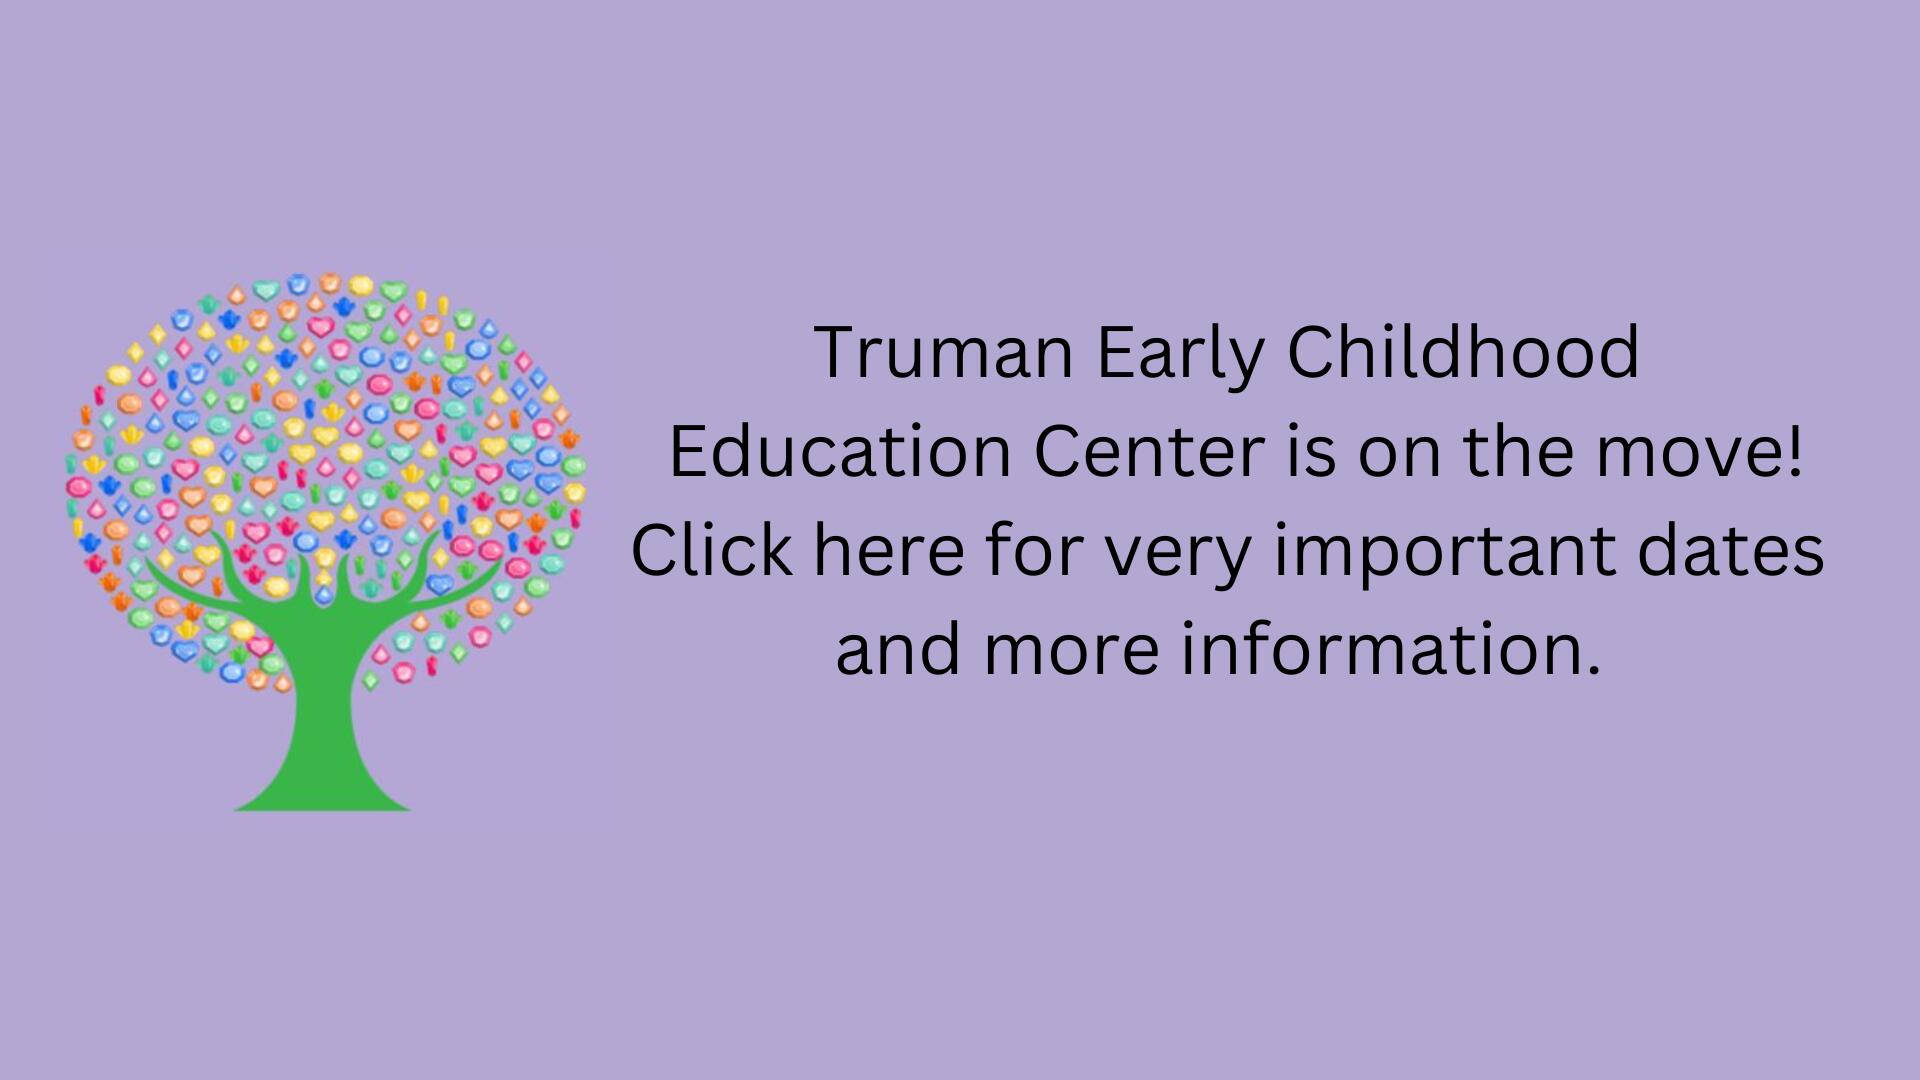 Truman Early Childhood Education Center